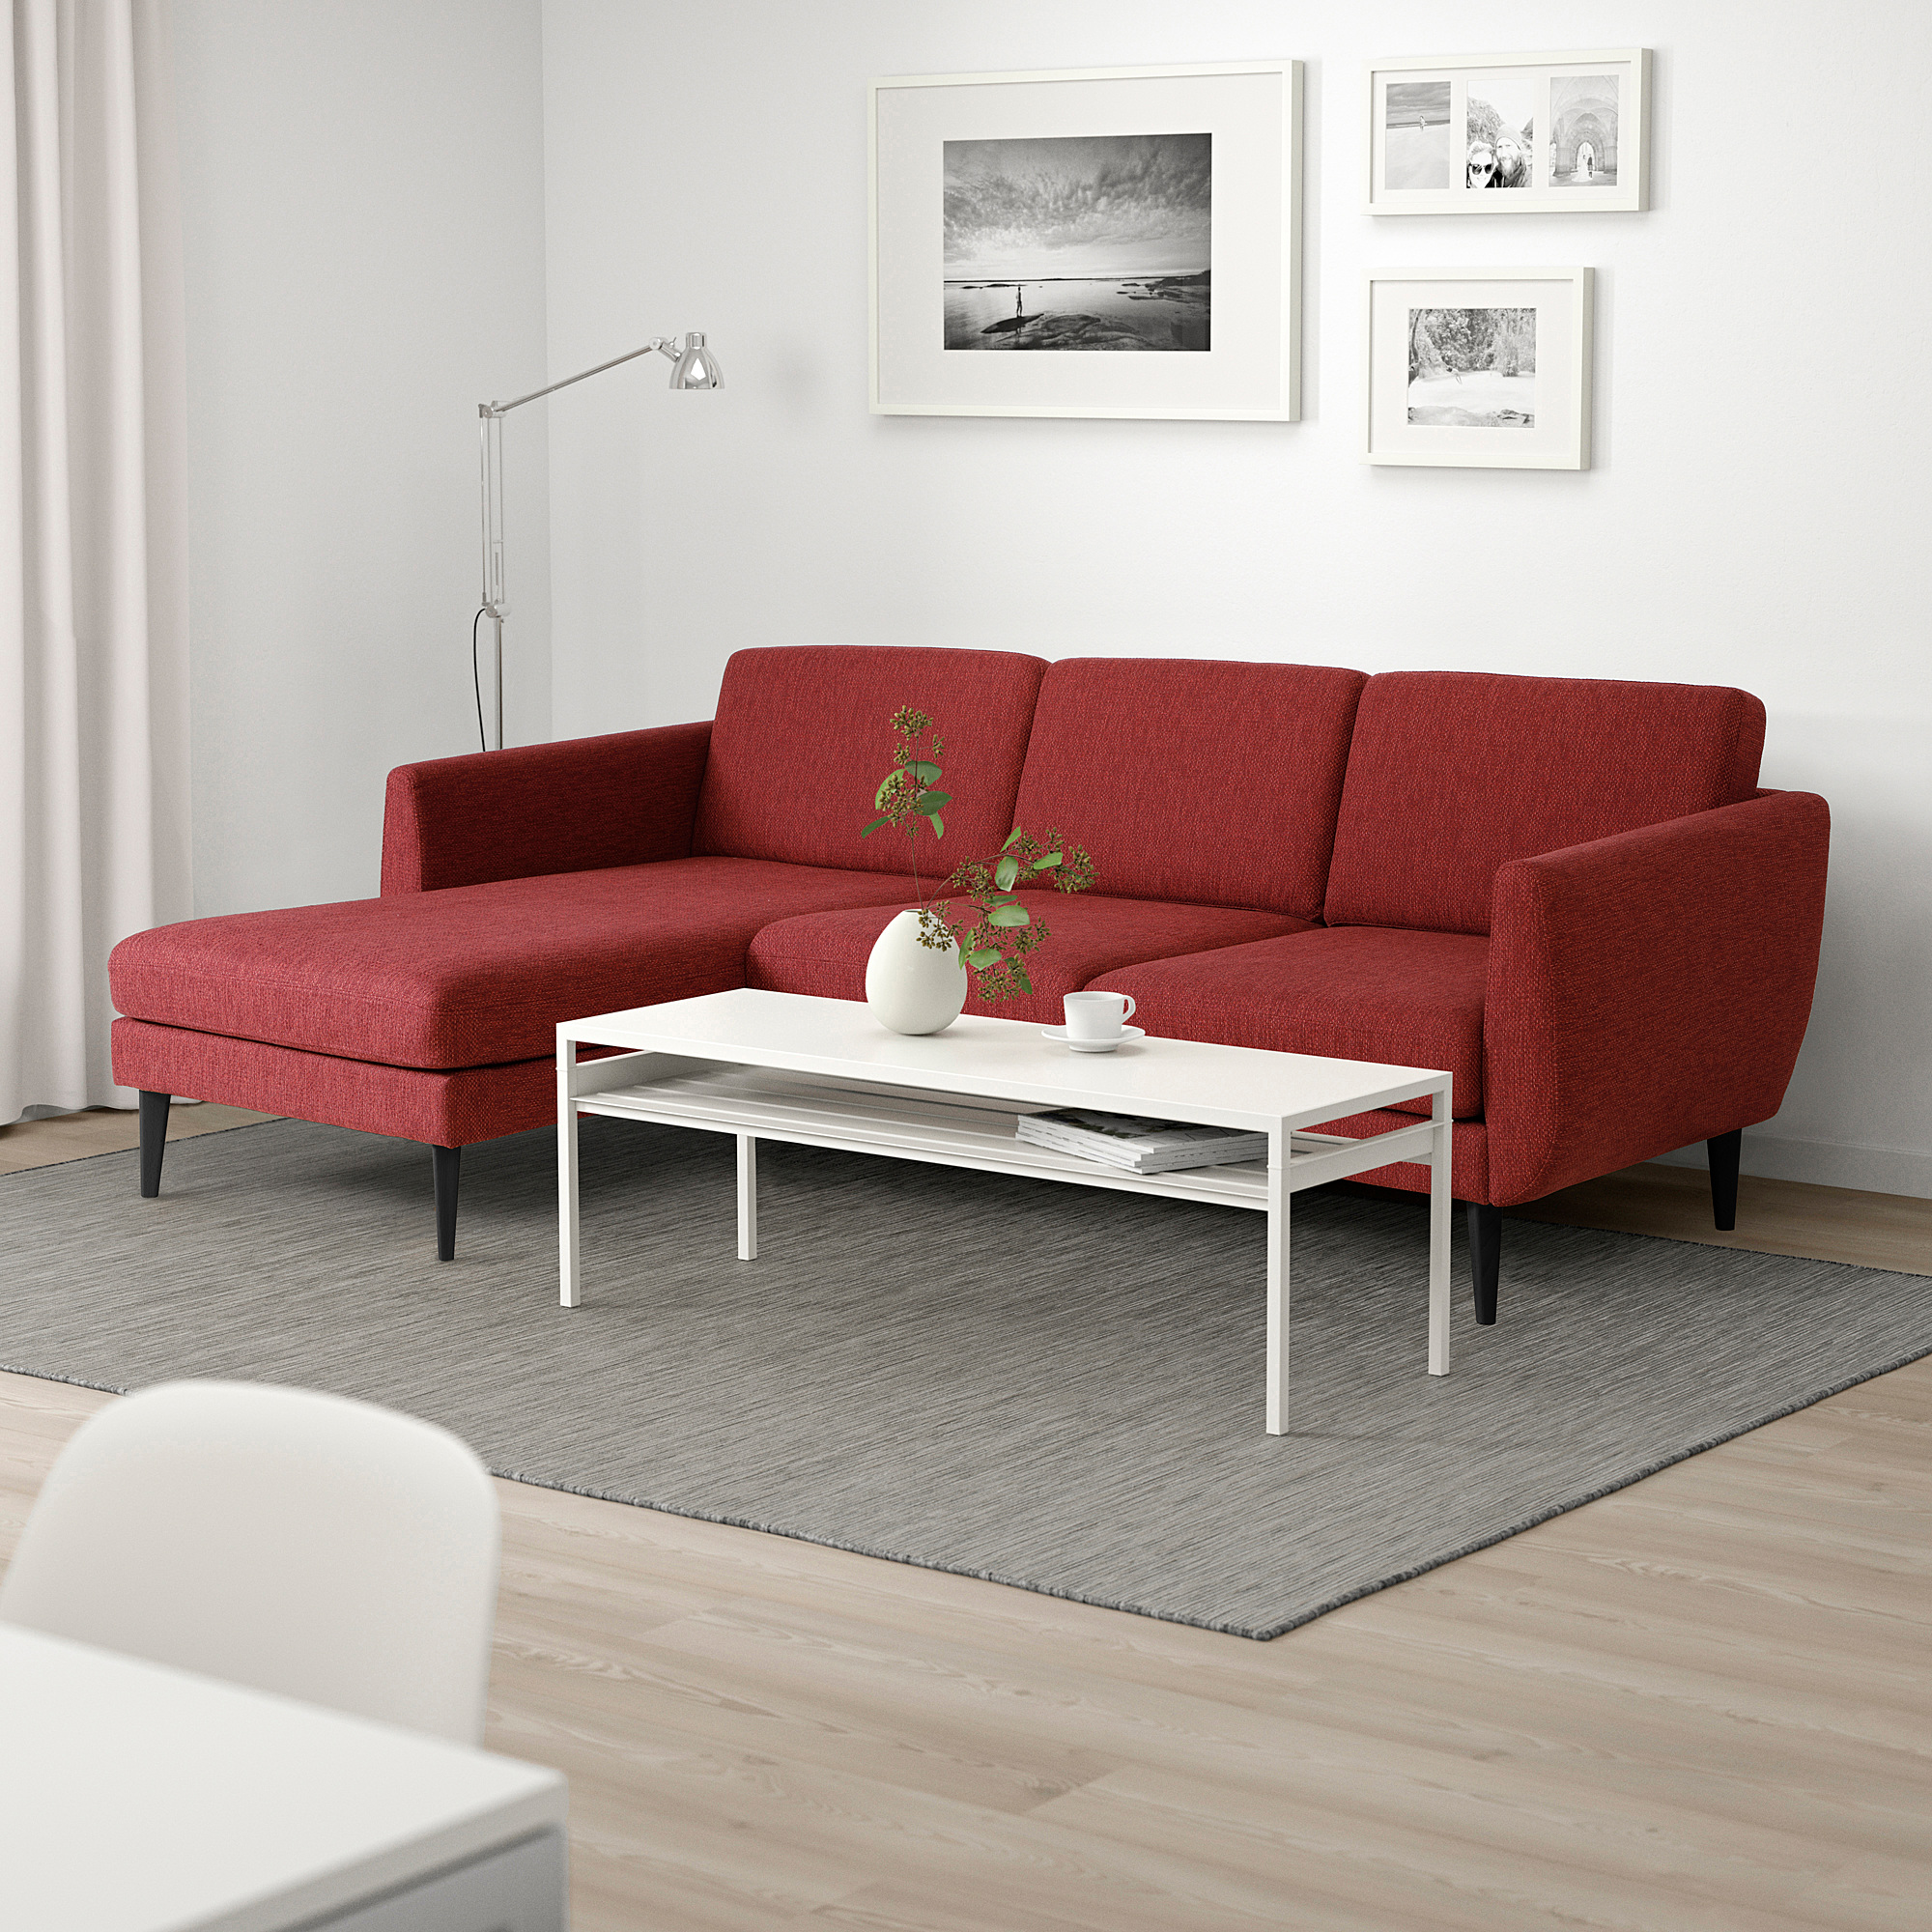 SMEDSTORP 3-seat sofa with chaise longue